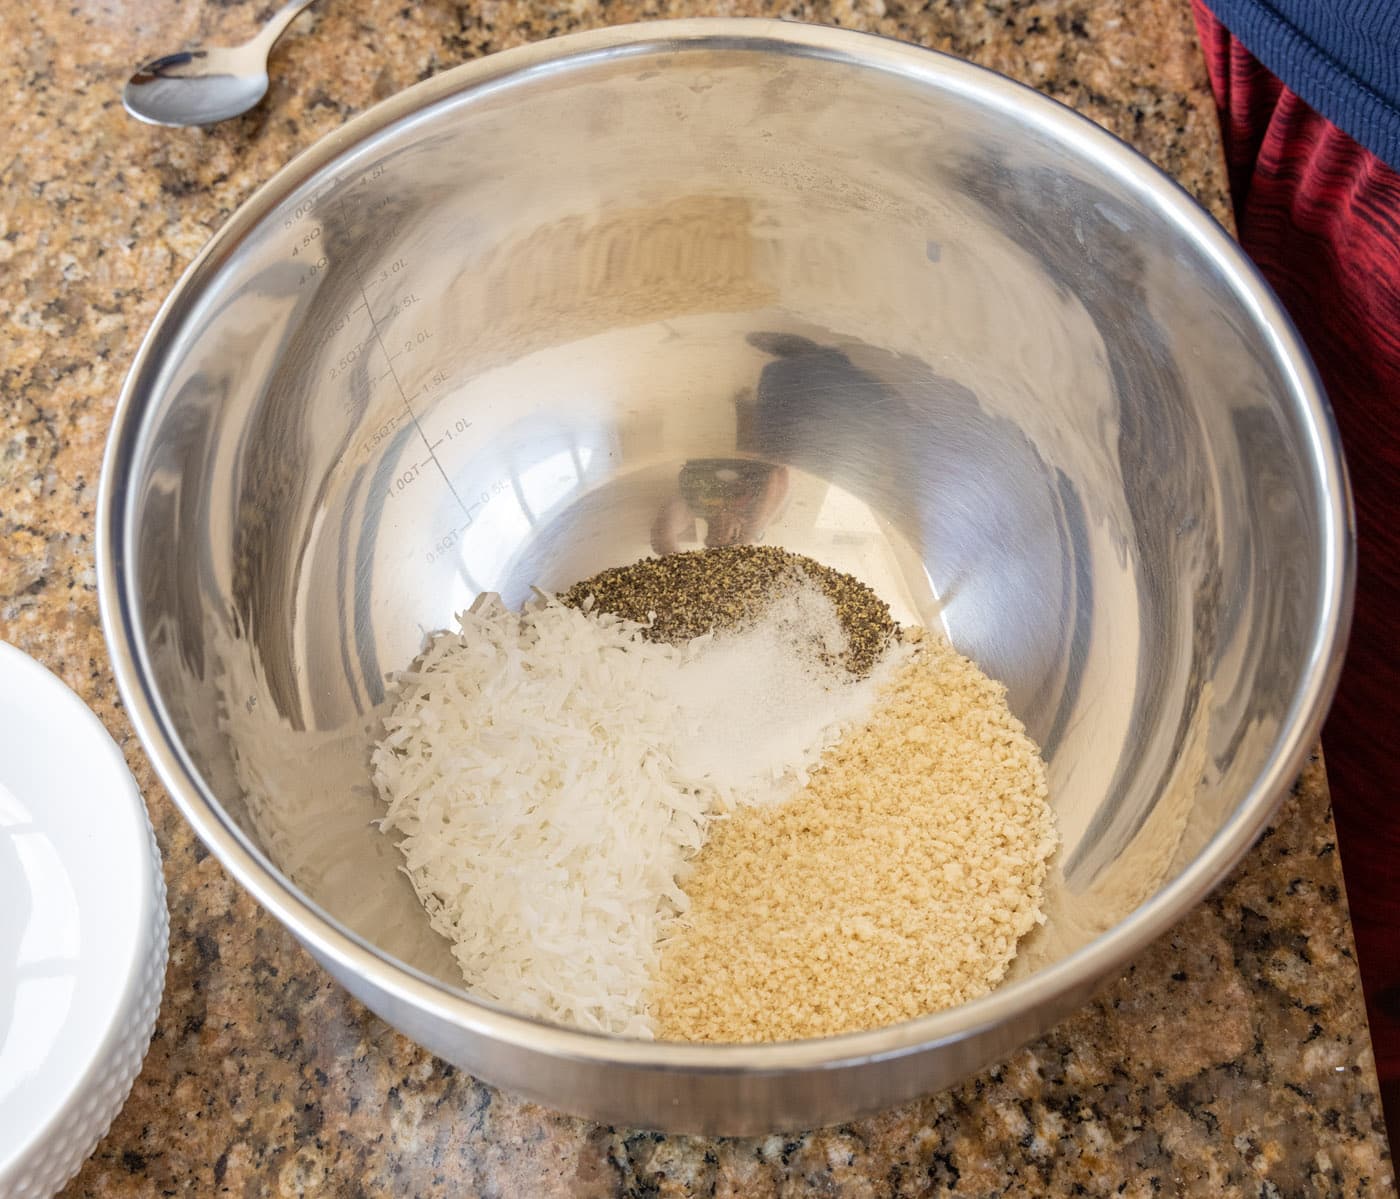 breadcrumbs, coconut flakes, and seasonings in a large mixing bowl